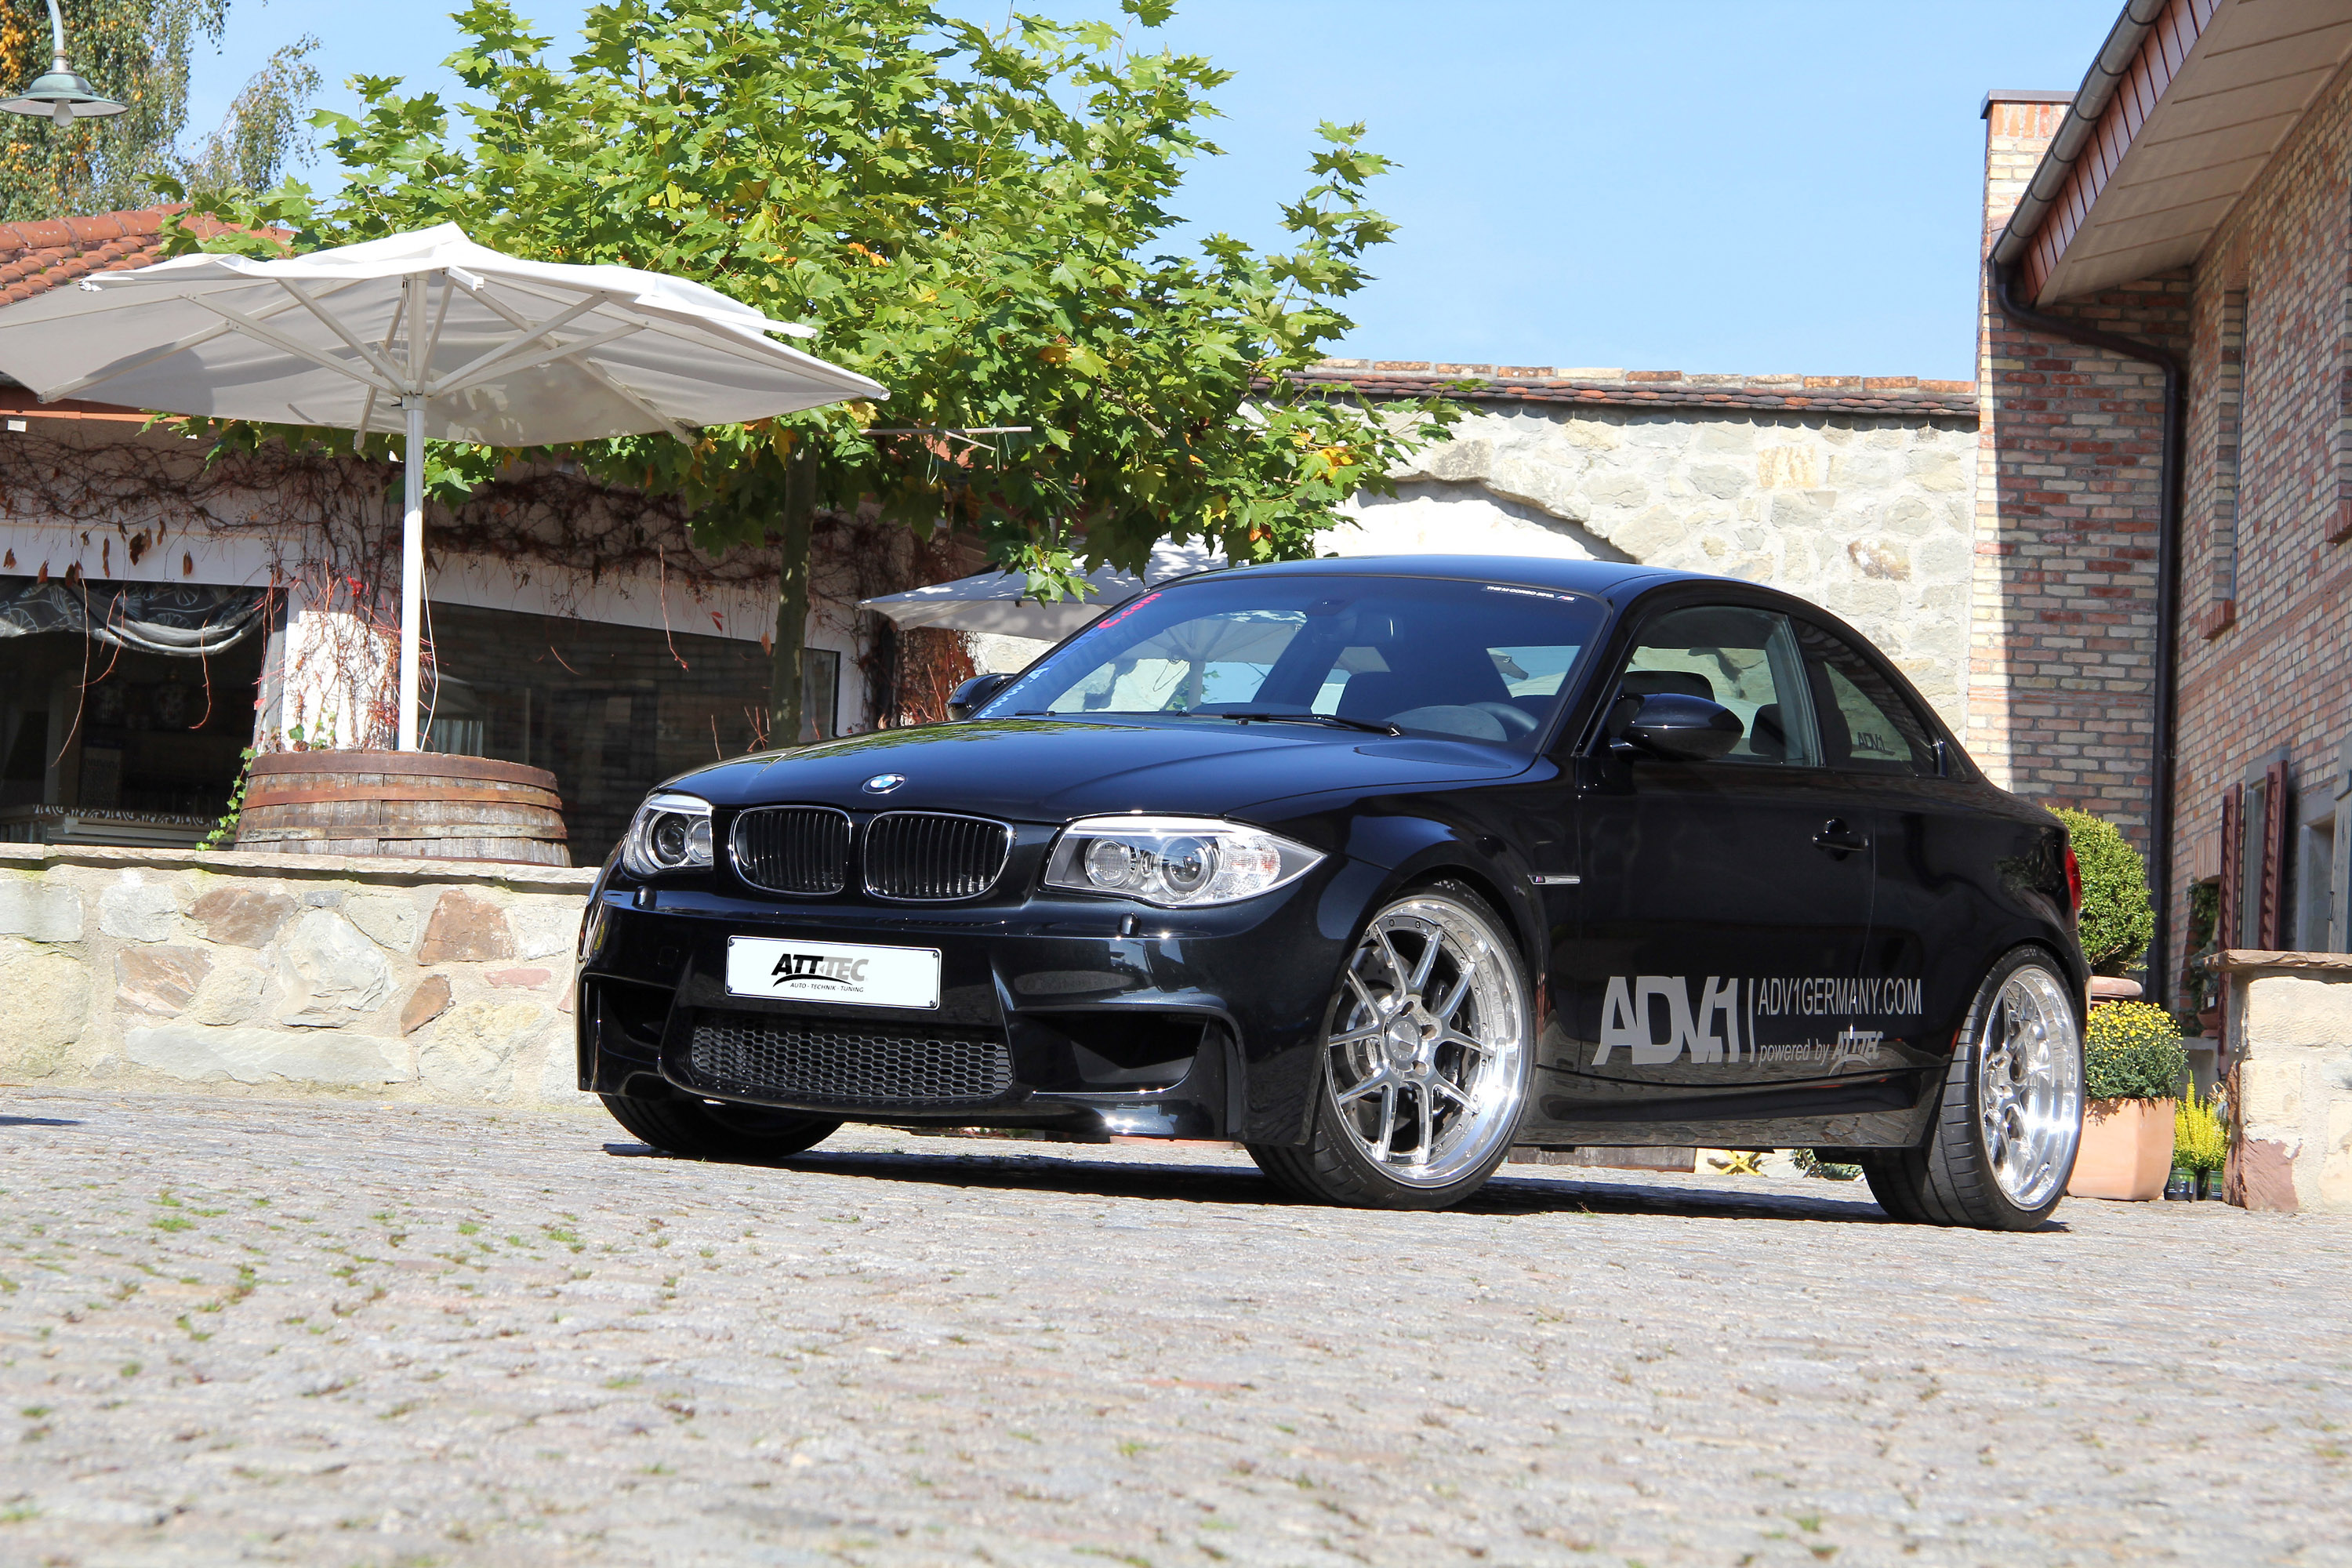 2012, Att tec, Bmw, 1 series, M coupe, Coupe, Tuning Wallpaper